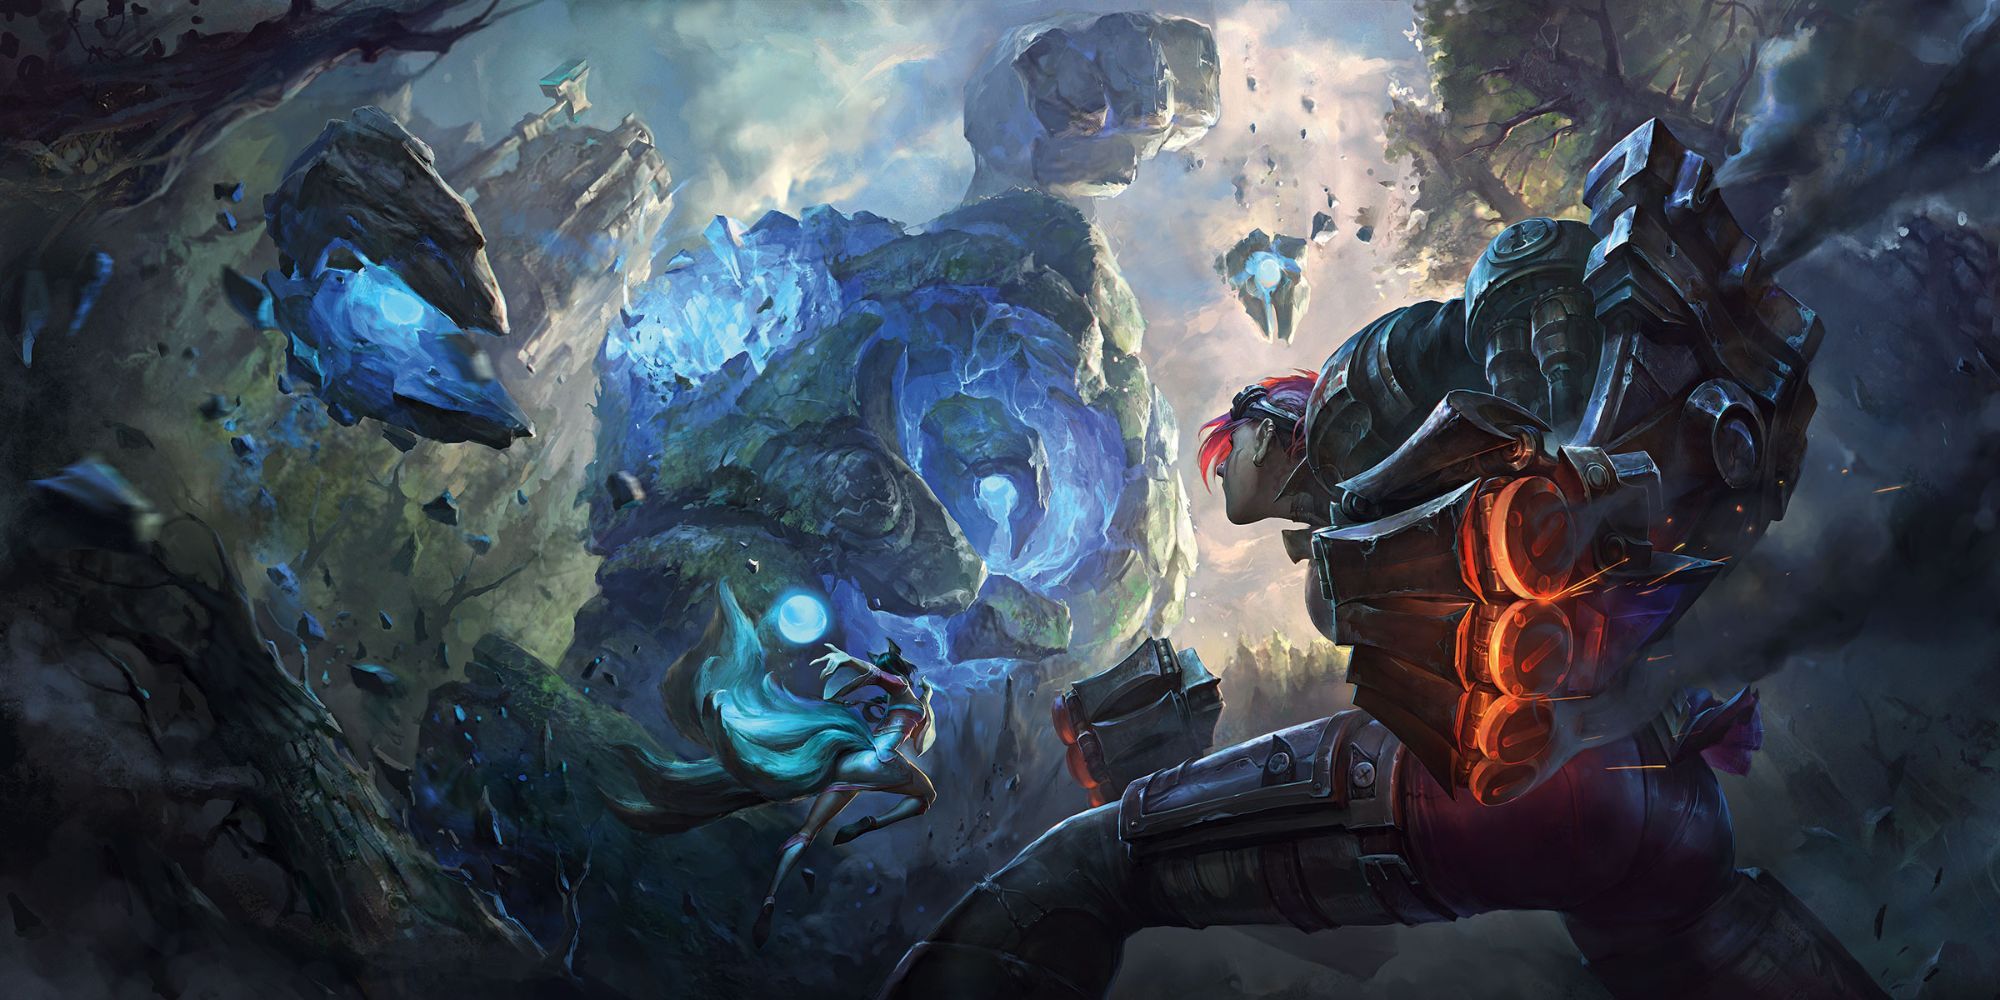 Image shows Vi facing off against the Blue Sentinel.